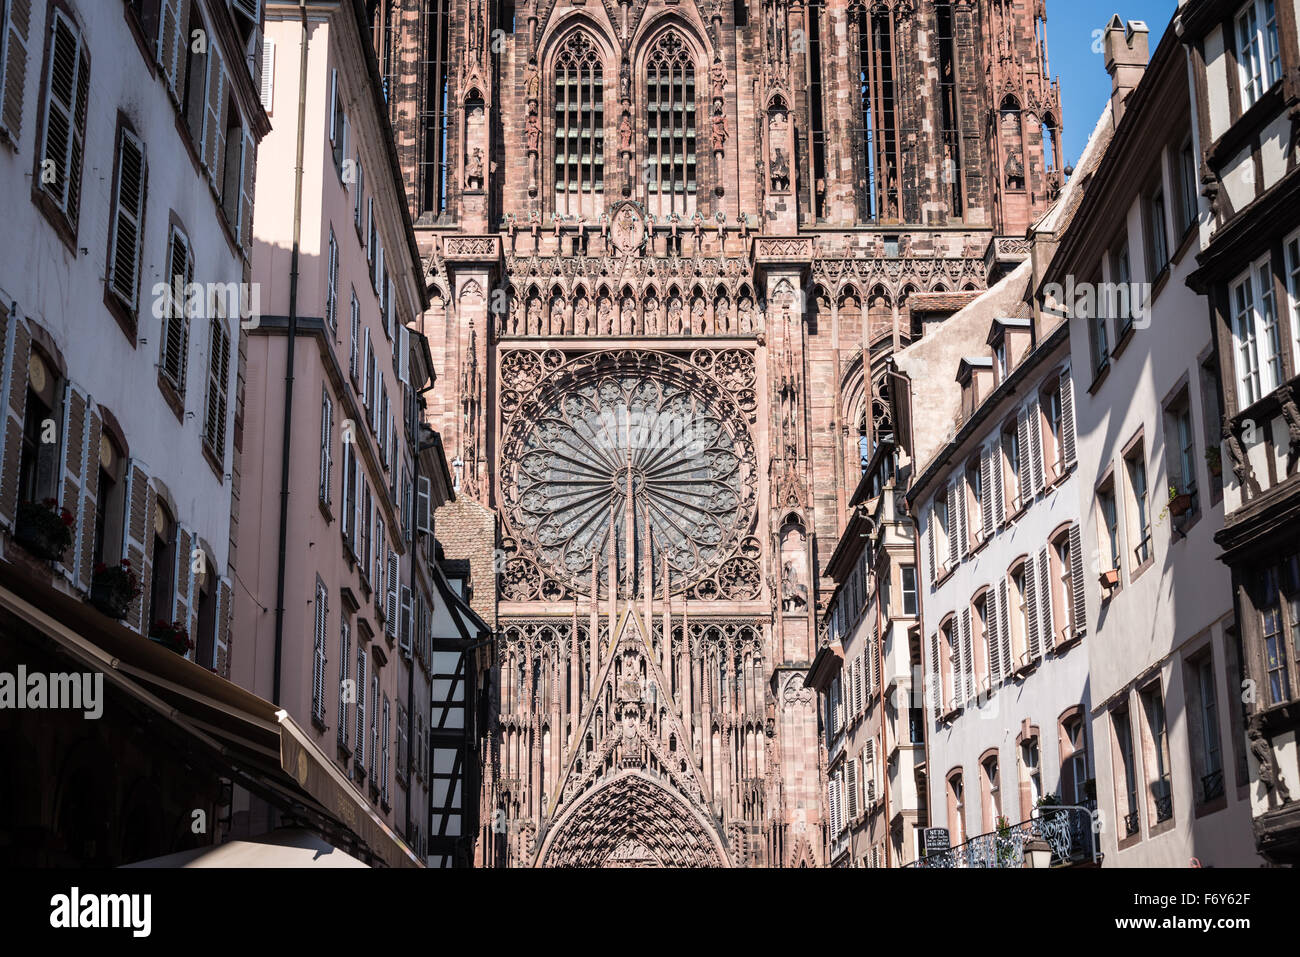 Cathedral of Our Lady of Strasbourg, Alsace, France Stock Photo